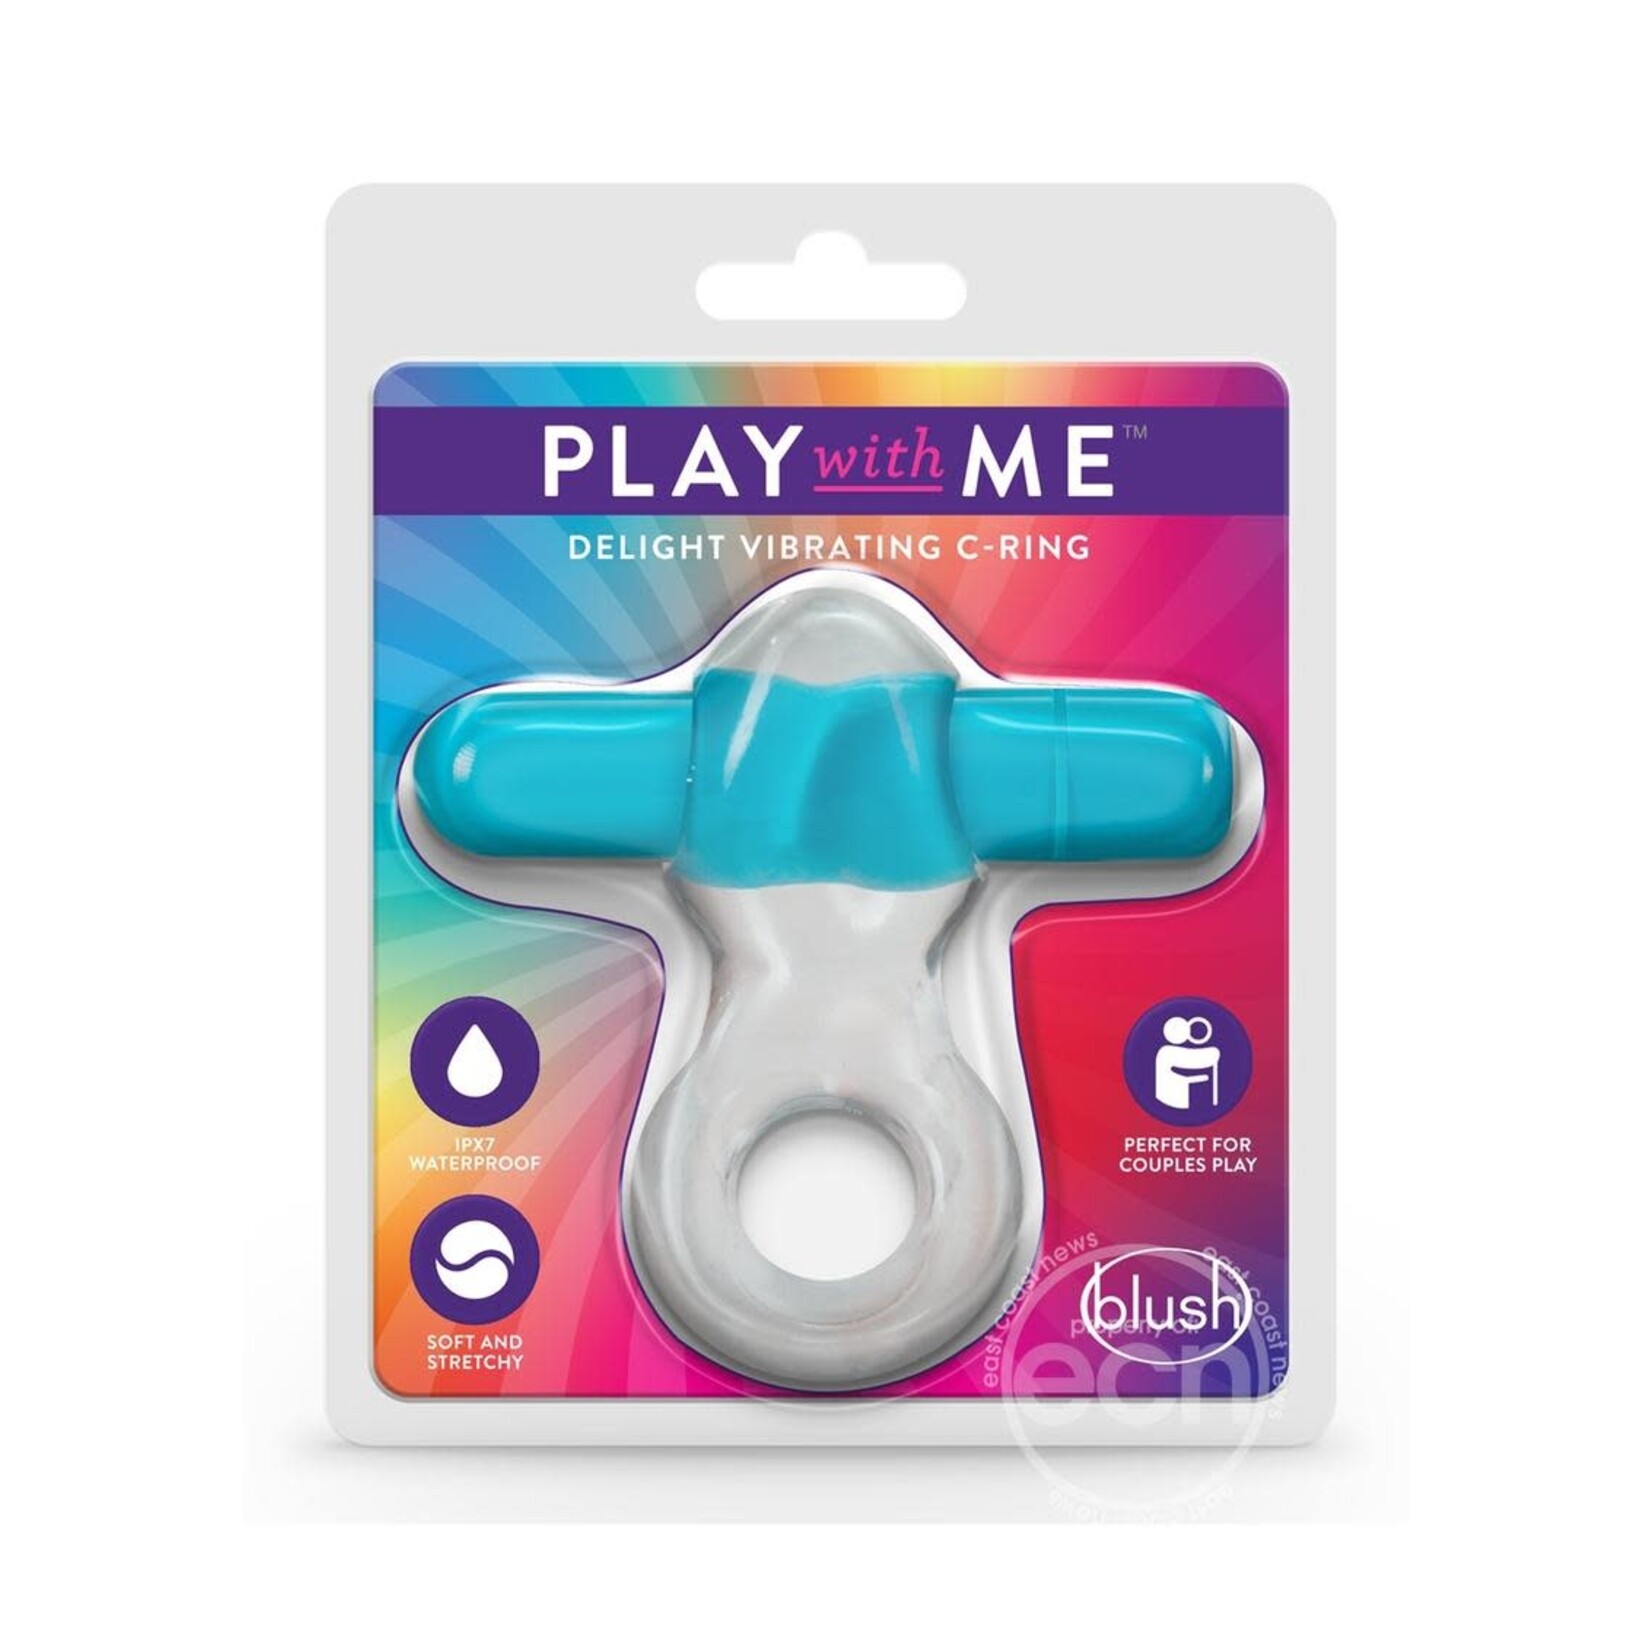 play with me Blush Play with Me Delight Vibrating C Ring - Blue